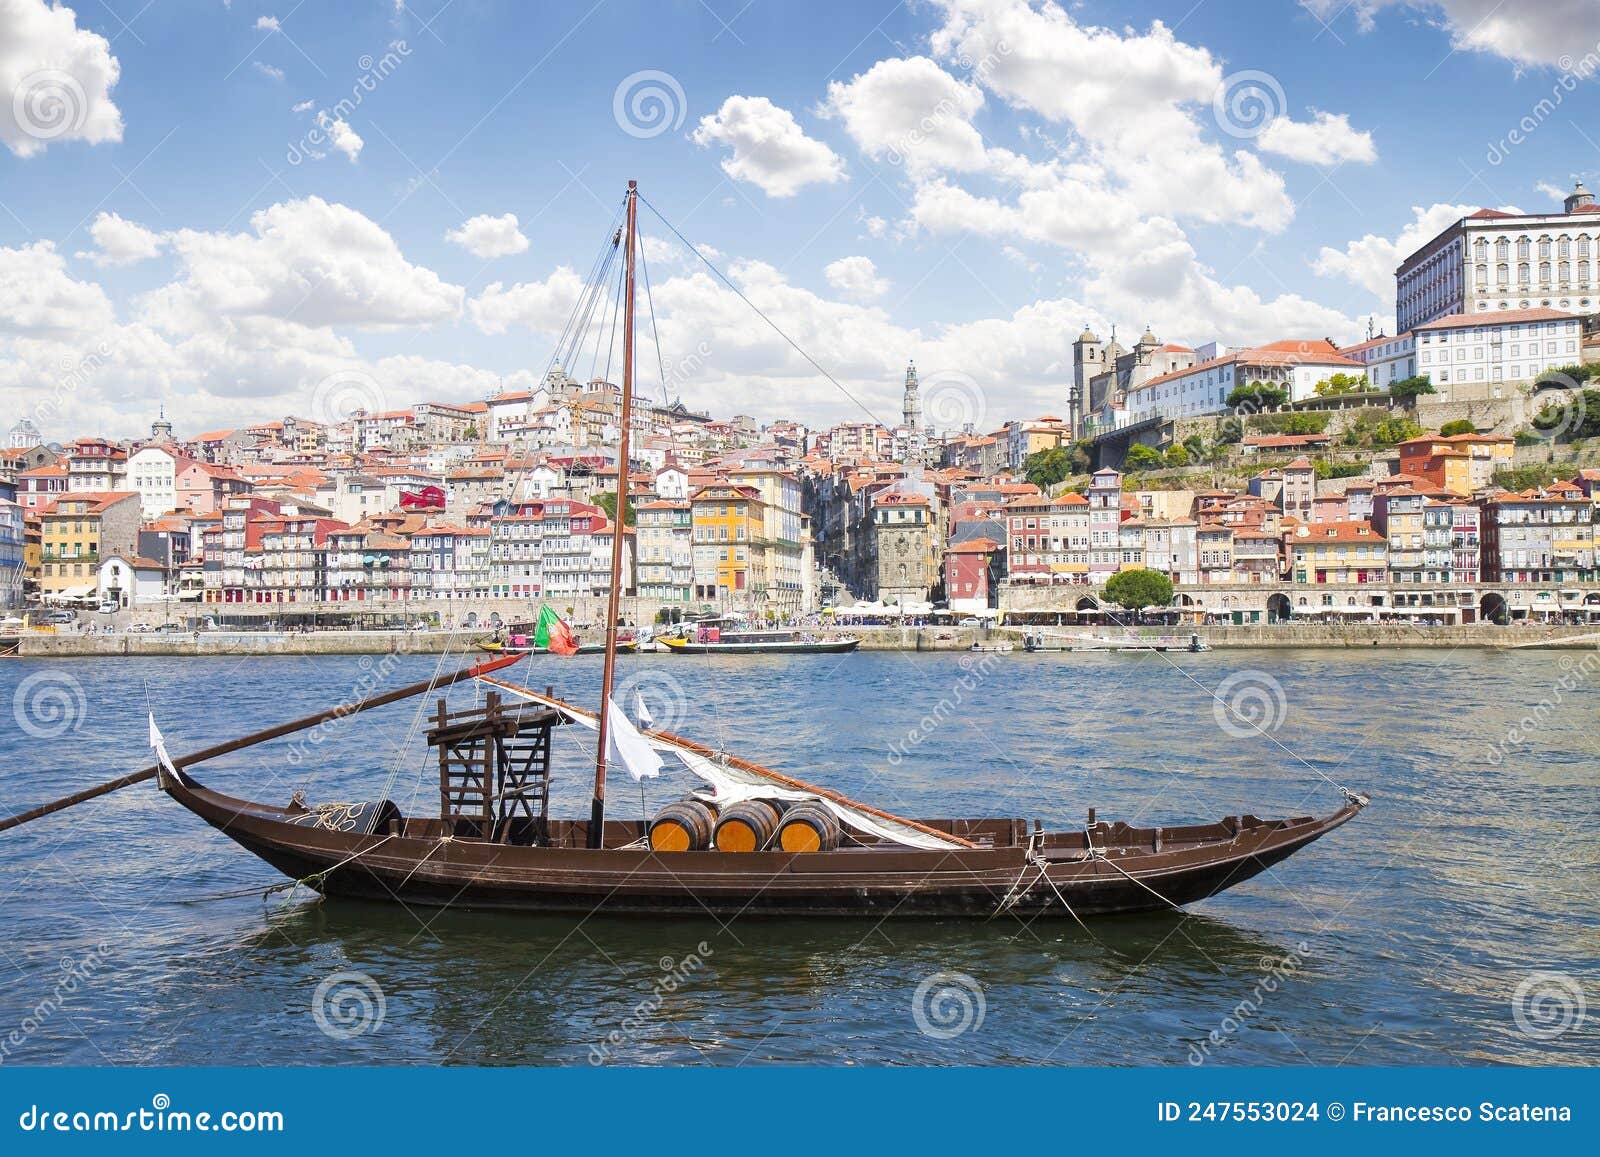 traditional old portuguese wooden boats called barcos rabelos, used in the past to transport the famous port wine - oporto -